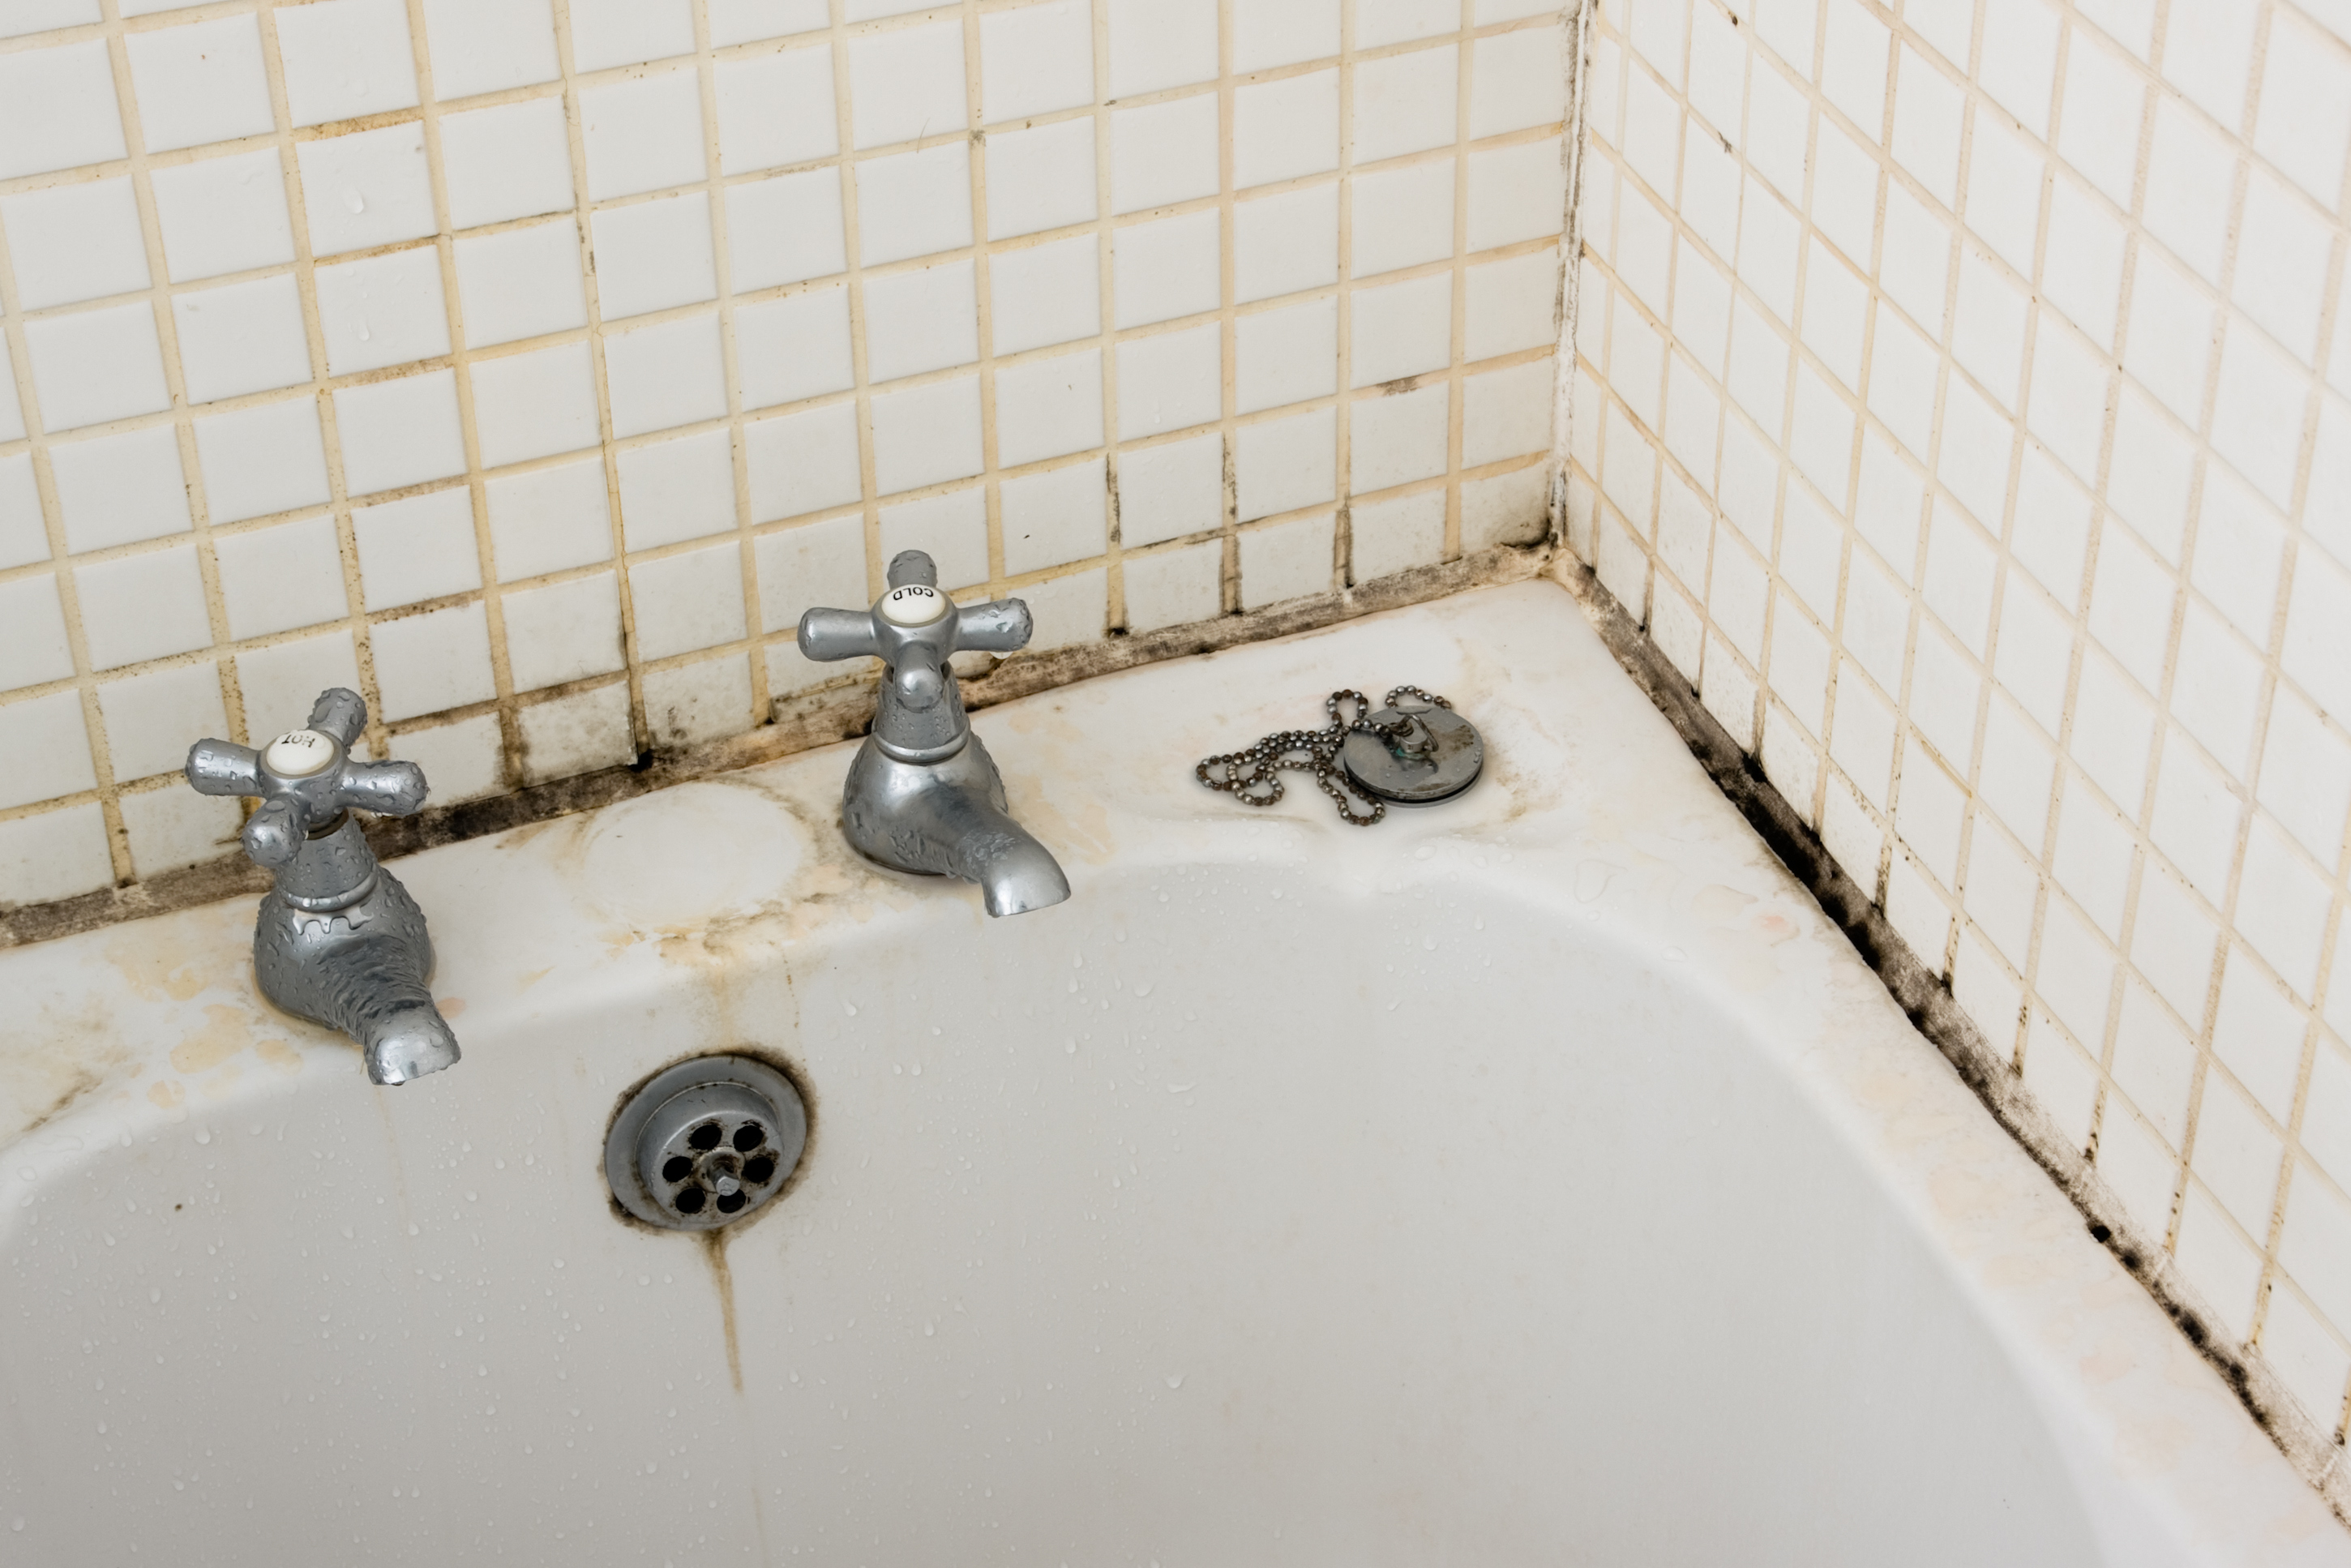 I found mold in the bathroom - what should I do?